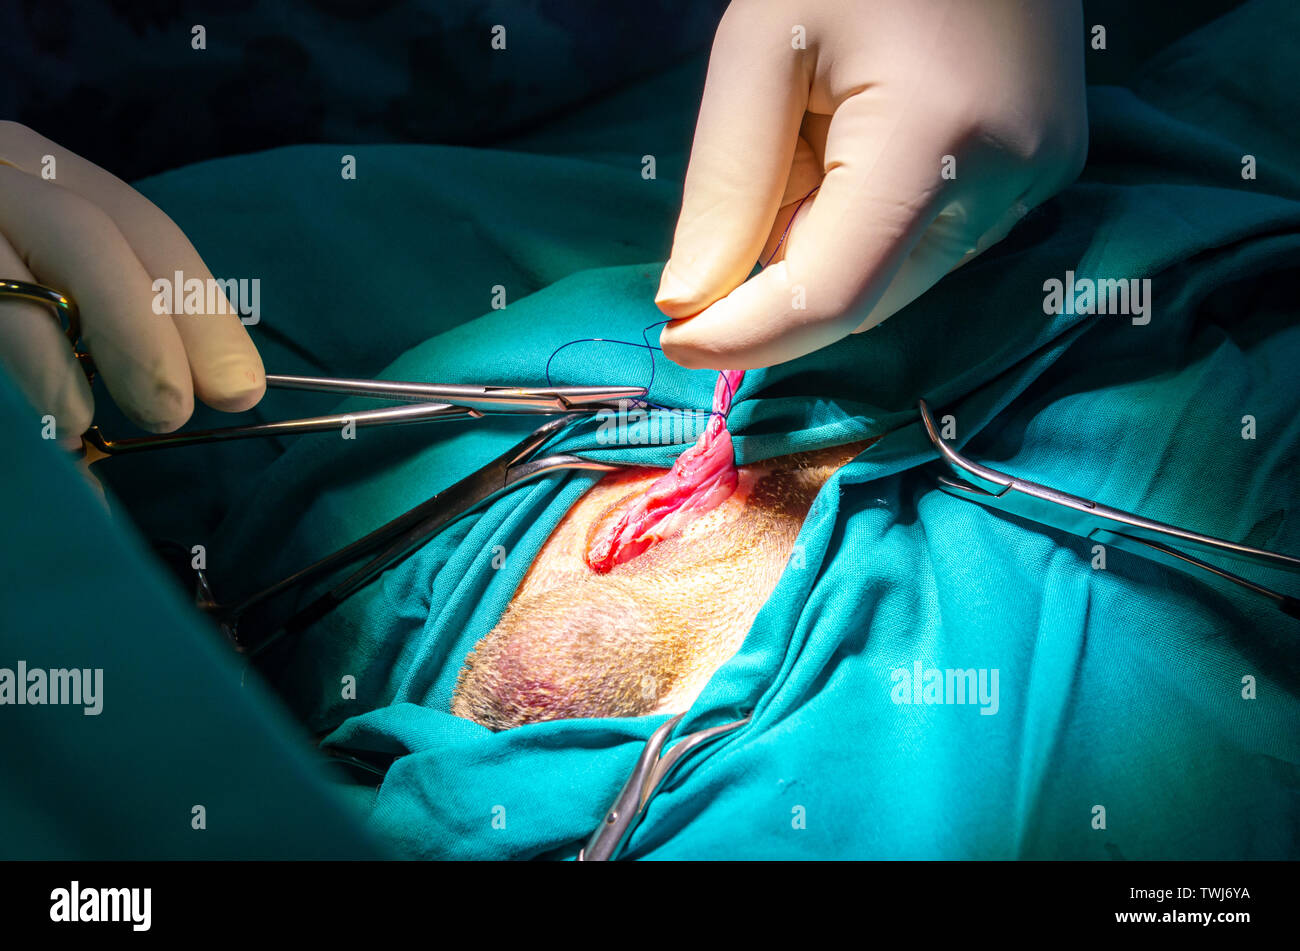 Ligation of the vas deferens and its vessels by a veterinarian Stock Photo